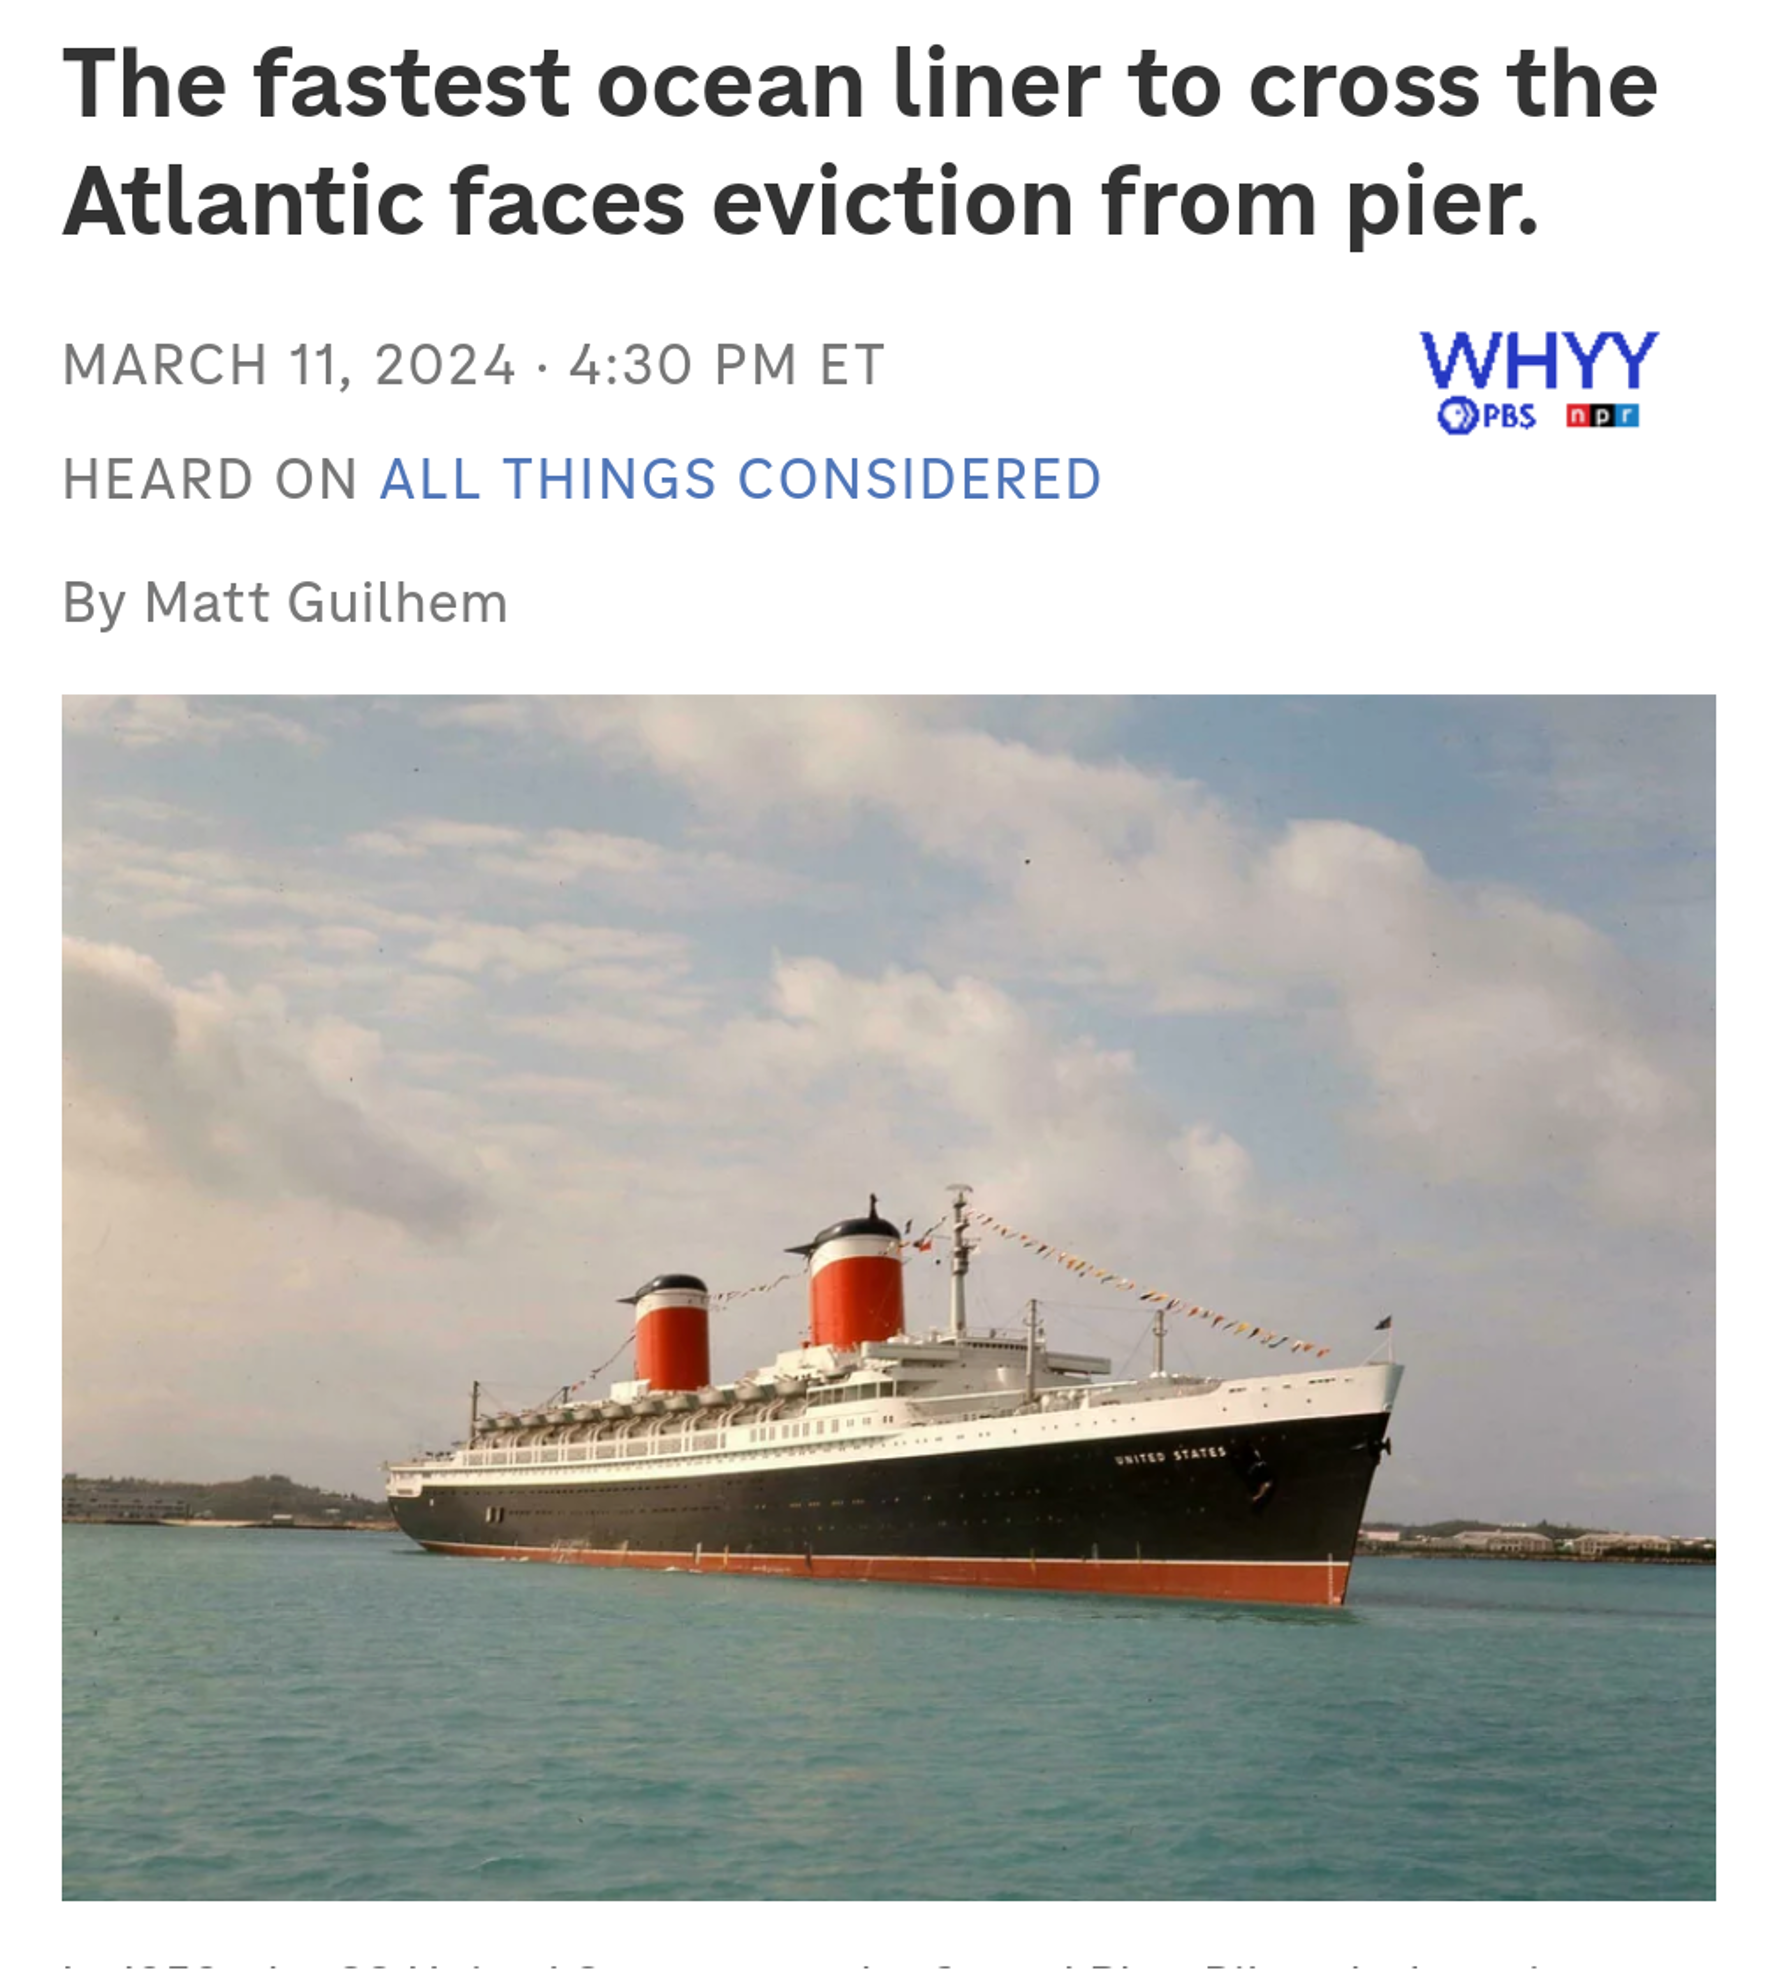 NPR: The fastest ocean liner to cross the Atlantic faces eviction from a pier